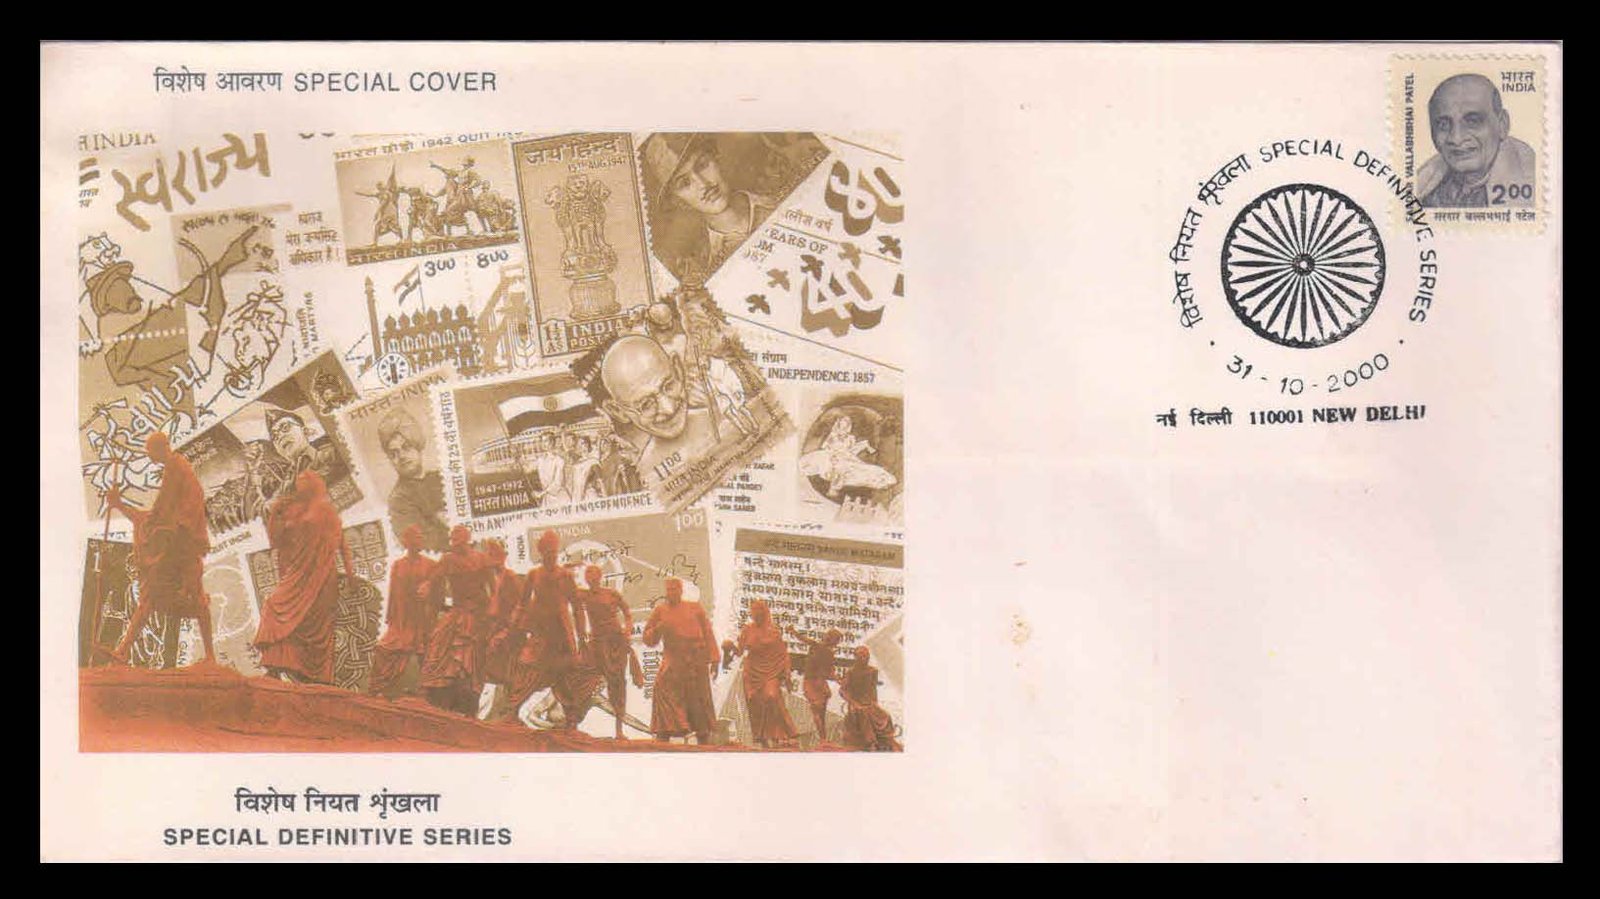 INDIA 31-10-2000, Special Definitive Series, Sardar Vallabh Bhai Patel, 1 Value on First Day Cover